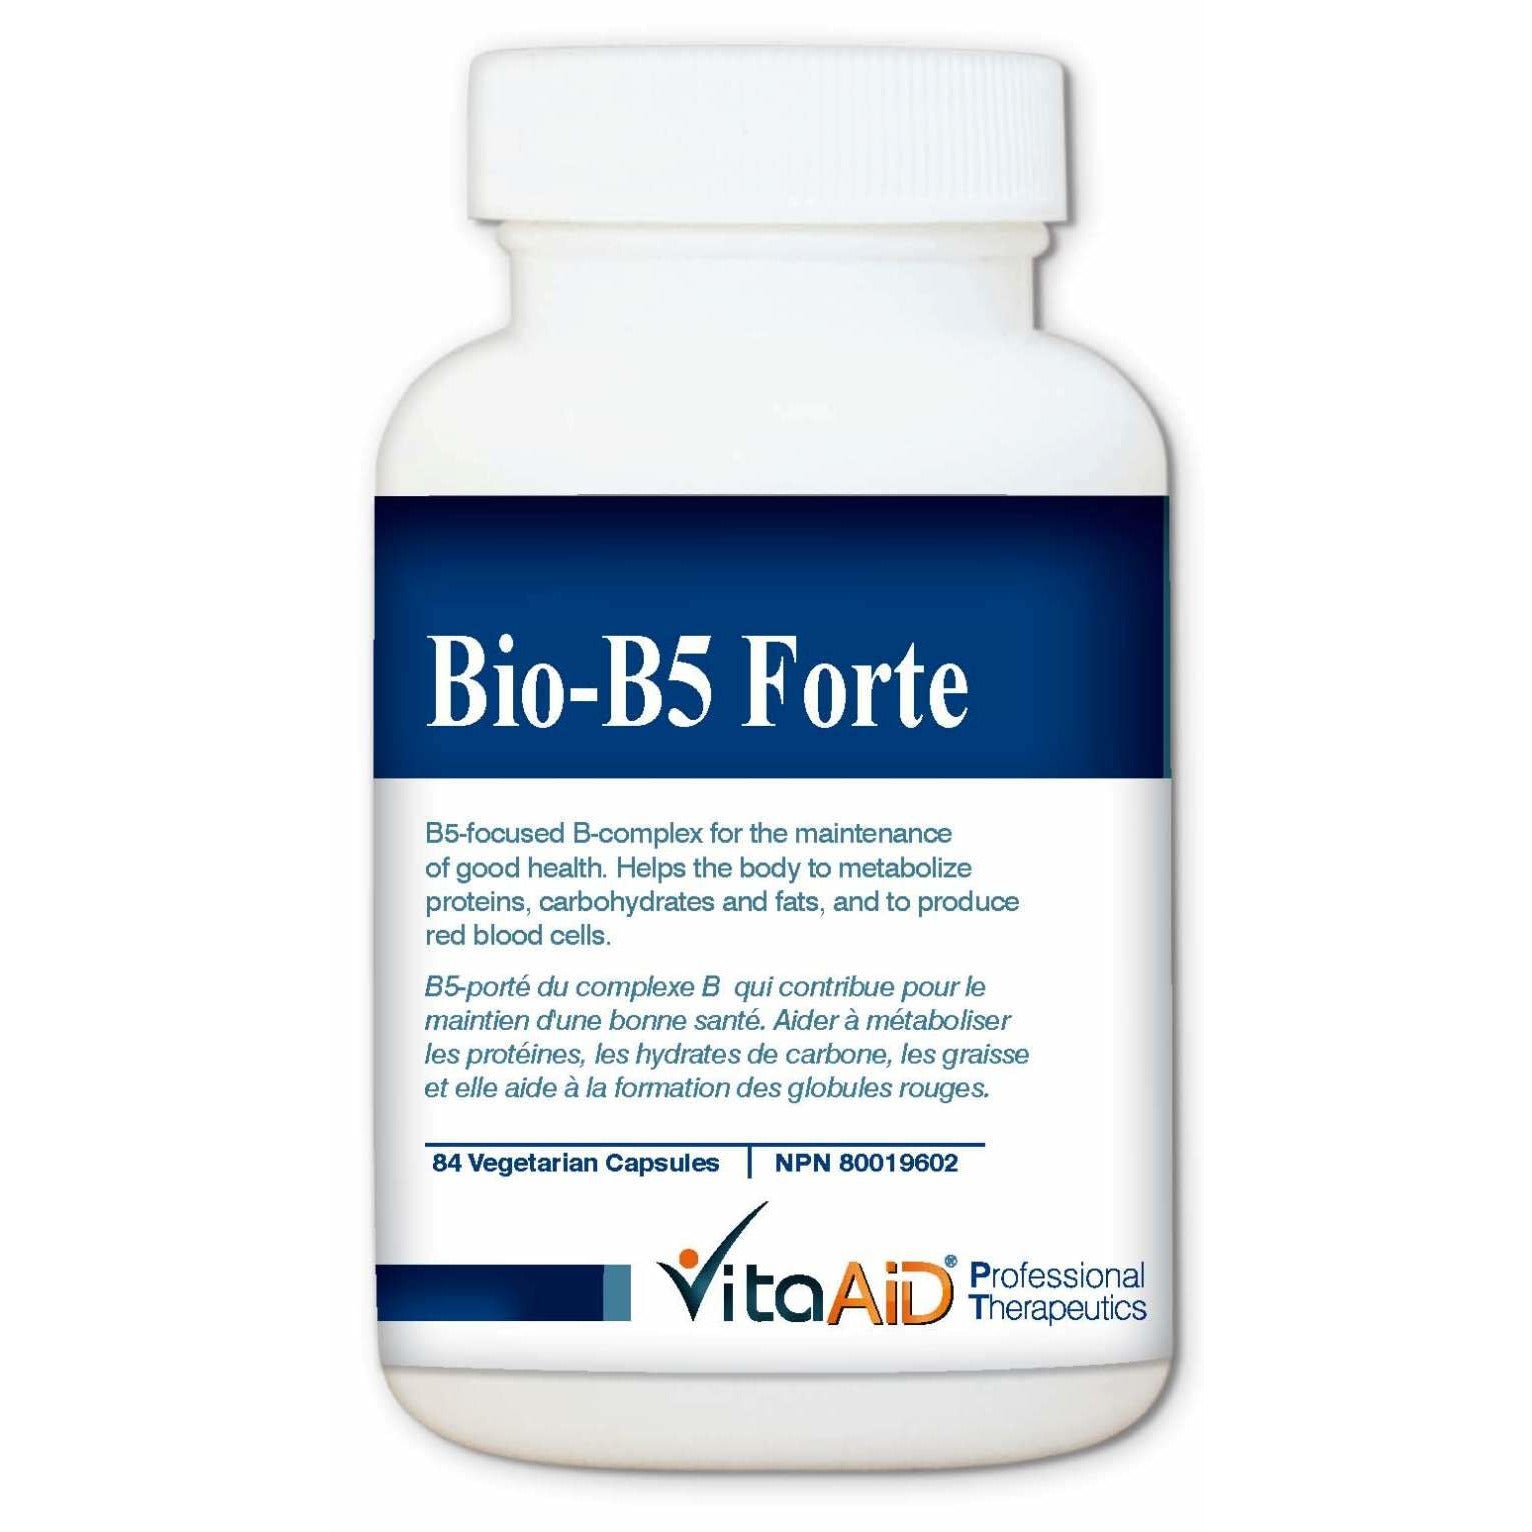 Bio-B5 Forte B5-Focused B-Complex to Restore Body's Metabolism and Support the Adrenals 84 veg caps